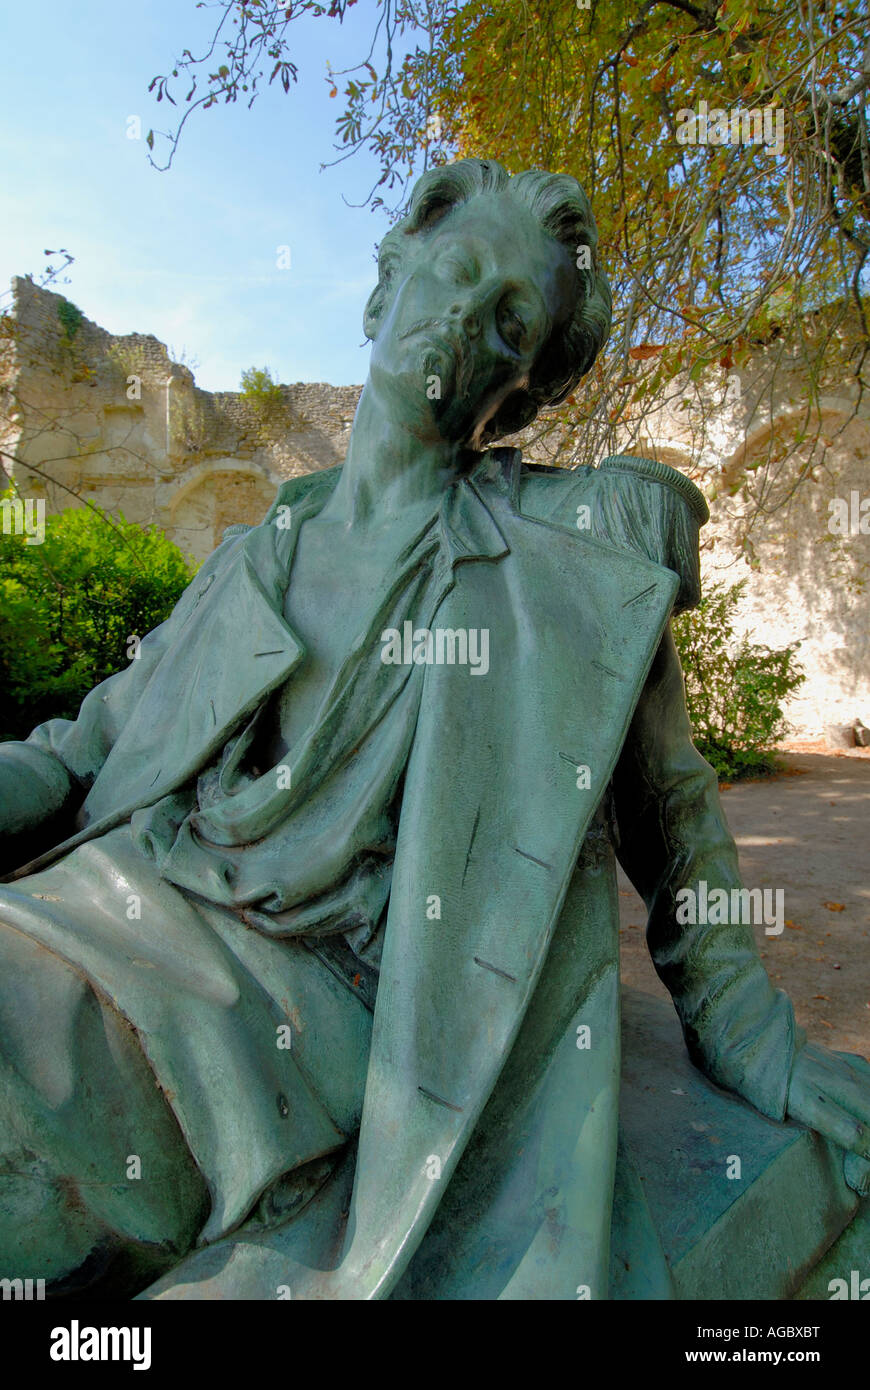 Reclining statue of Count Xavier Branicki in the grounds of the chateau at Montresor, Touraine, France. Stock Photo